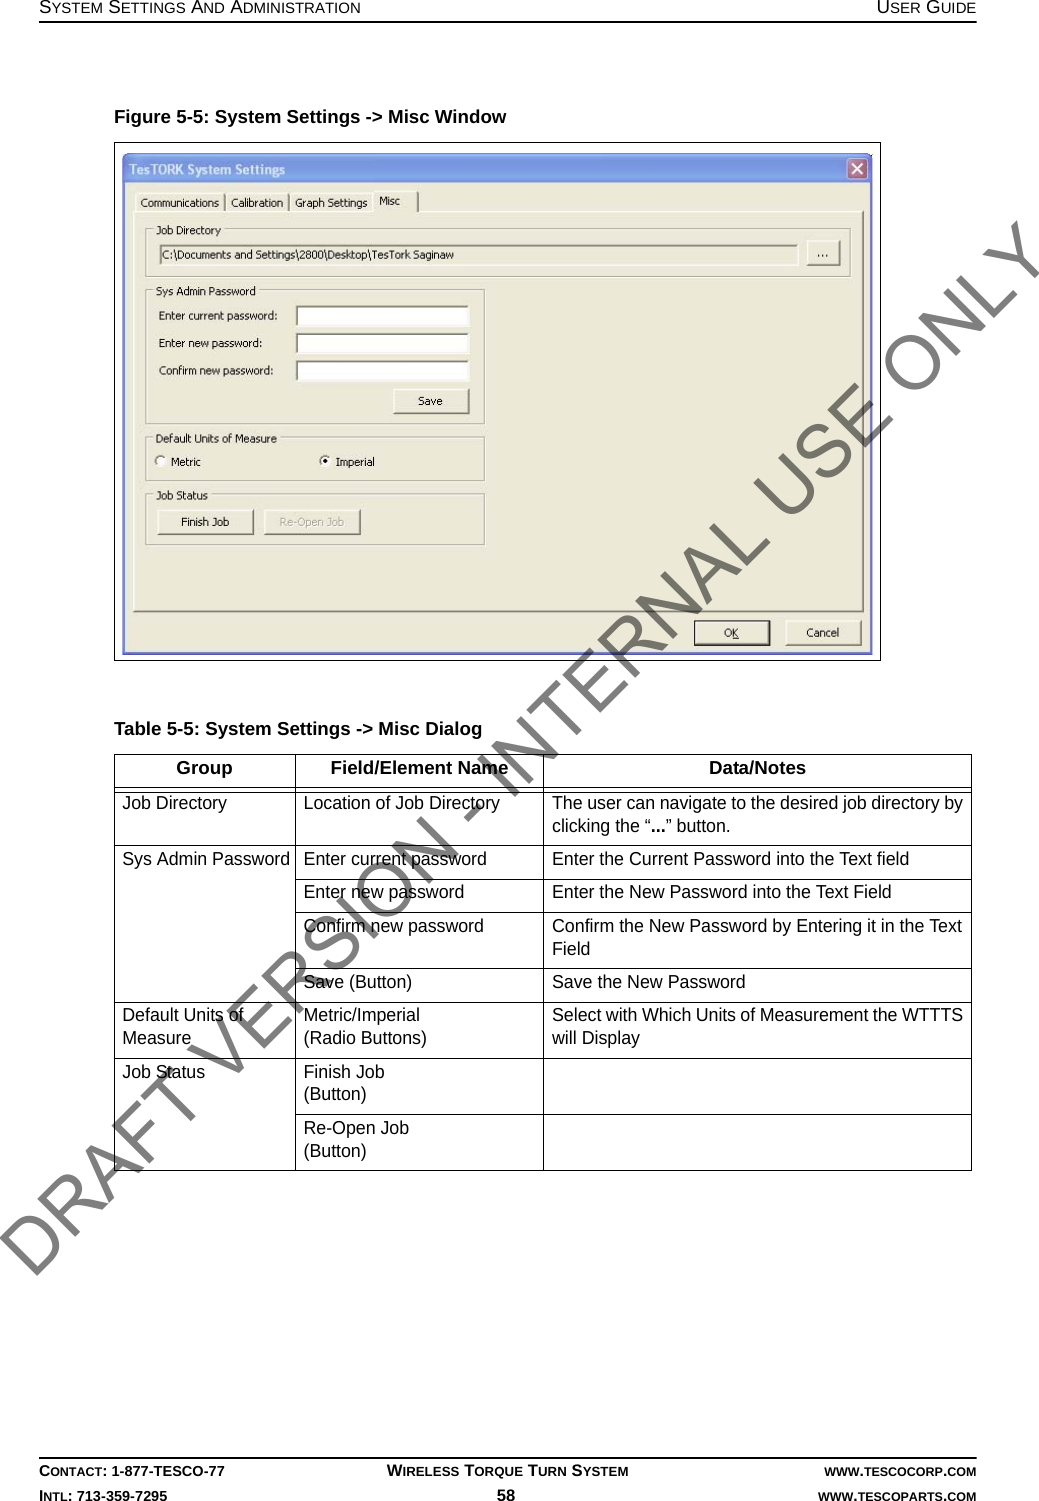 SYSTEM SETTINGS AND ADMINISTRATION USER GUIDECONTACT: 1-877-TESCO-77 WIRELESS TORQUE TURN SYSTEM WWW.TESCOCORP.COMINTL: 713-359-7295 58    WWW.TESCOPARTS.COMFigure 5-5: System Settings -&gt; Misc WindowTable 5-5: System Settings -&gt; Misc Dialog Group Field/Element Name Data/NotesJob Directory Location of Job Directory The user can navigate to the desired job directory by clicking the “...” button.Sys Admin Password Enter current password Enter the Current Password into the Text fieldEnter new password Enter the New Password into the Text FieldConfirm new password Confirm the New Password by Entering it in the Text FieldSave (Button) Save the New PasswordDefault Units of MeasureMetric/Imperial(Radio Buttons)Select with Which Units of Measurement the WTTTS will DisplayJob Status Finish Job(Button)Re-Open Job(Button)DRAFT VERSION - INTERNAL USE ONLY